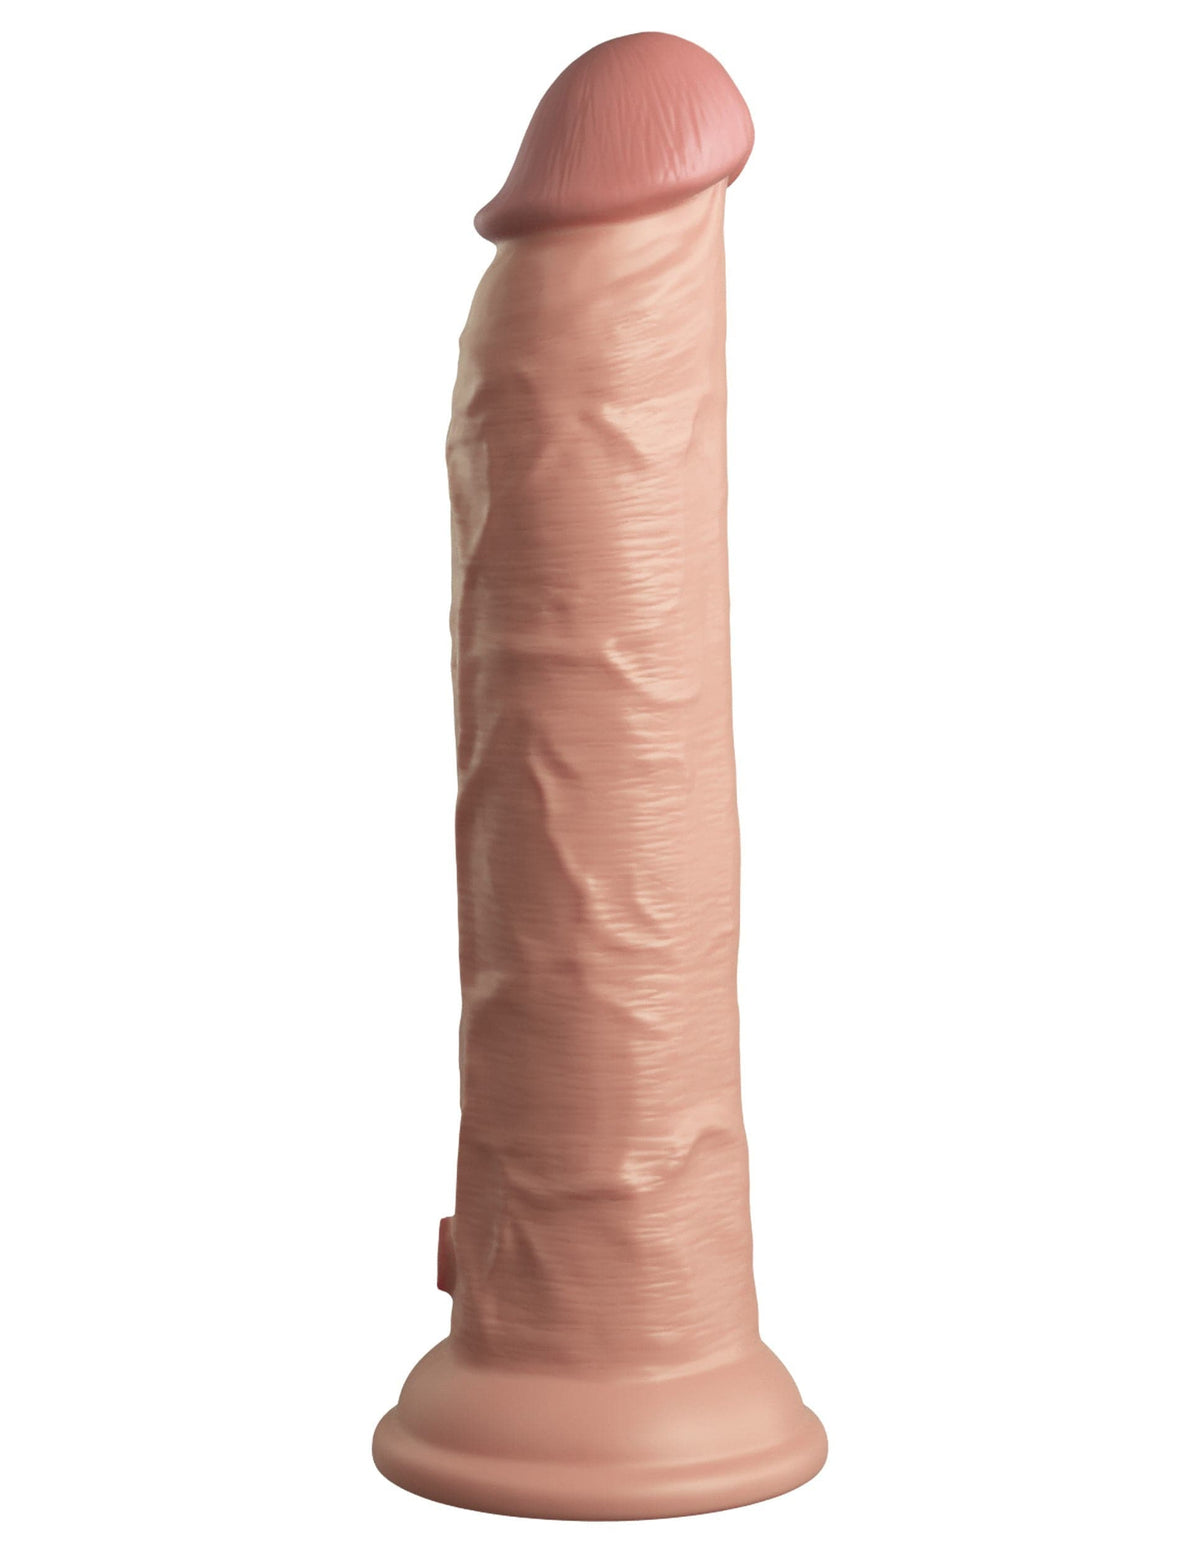 king cock elite 9 inch silicone dual density cock light